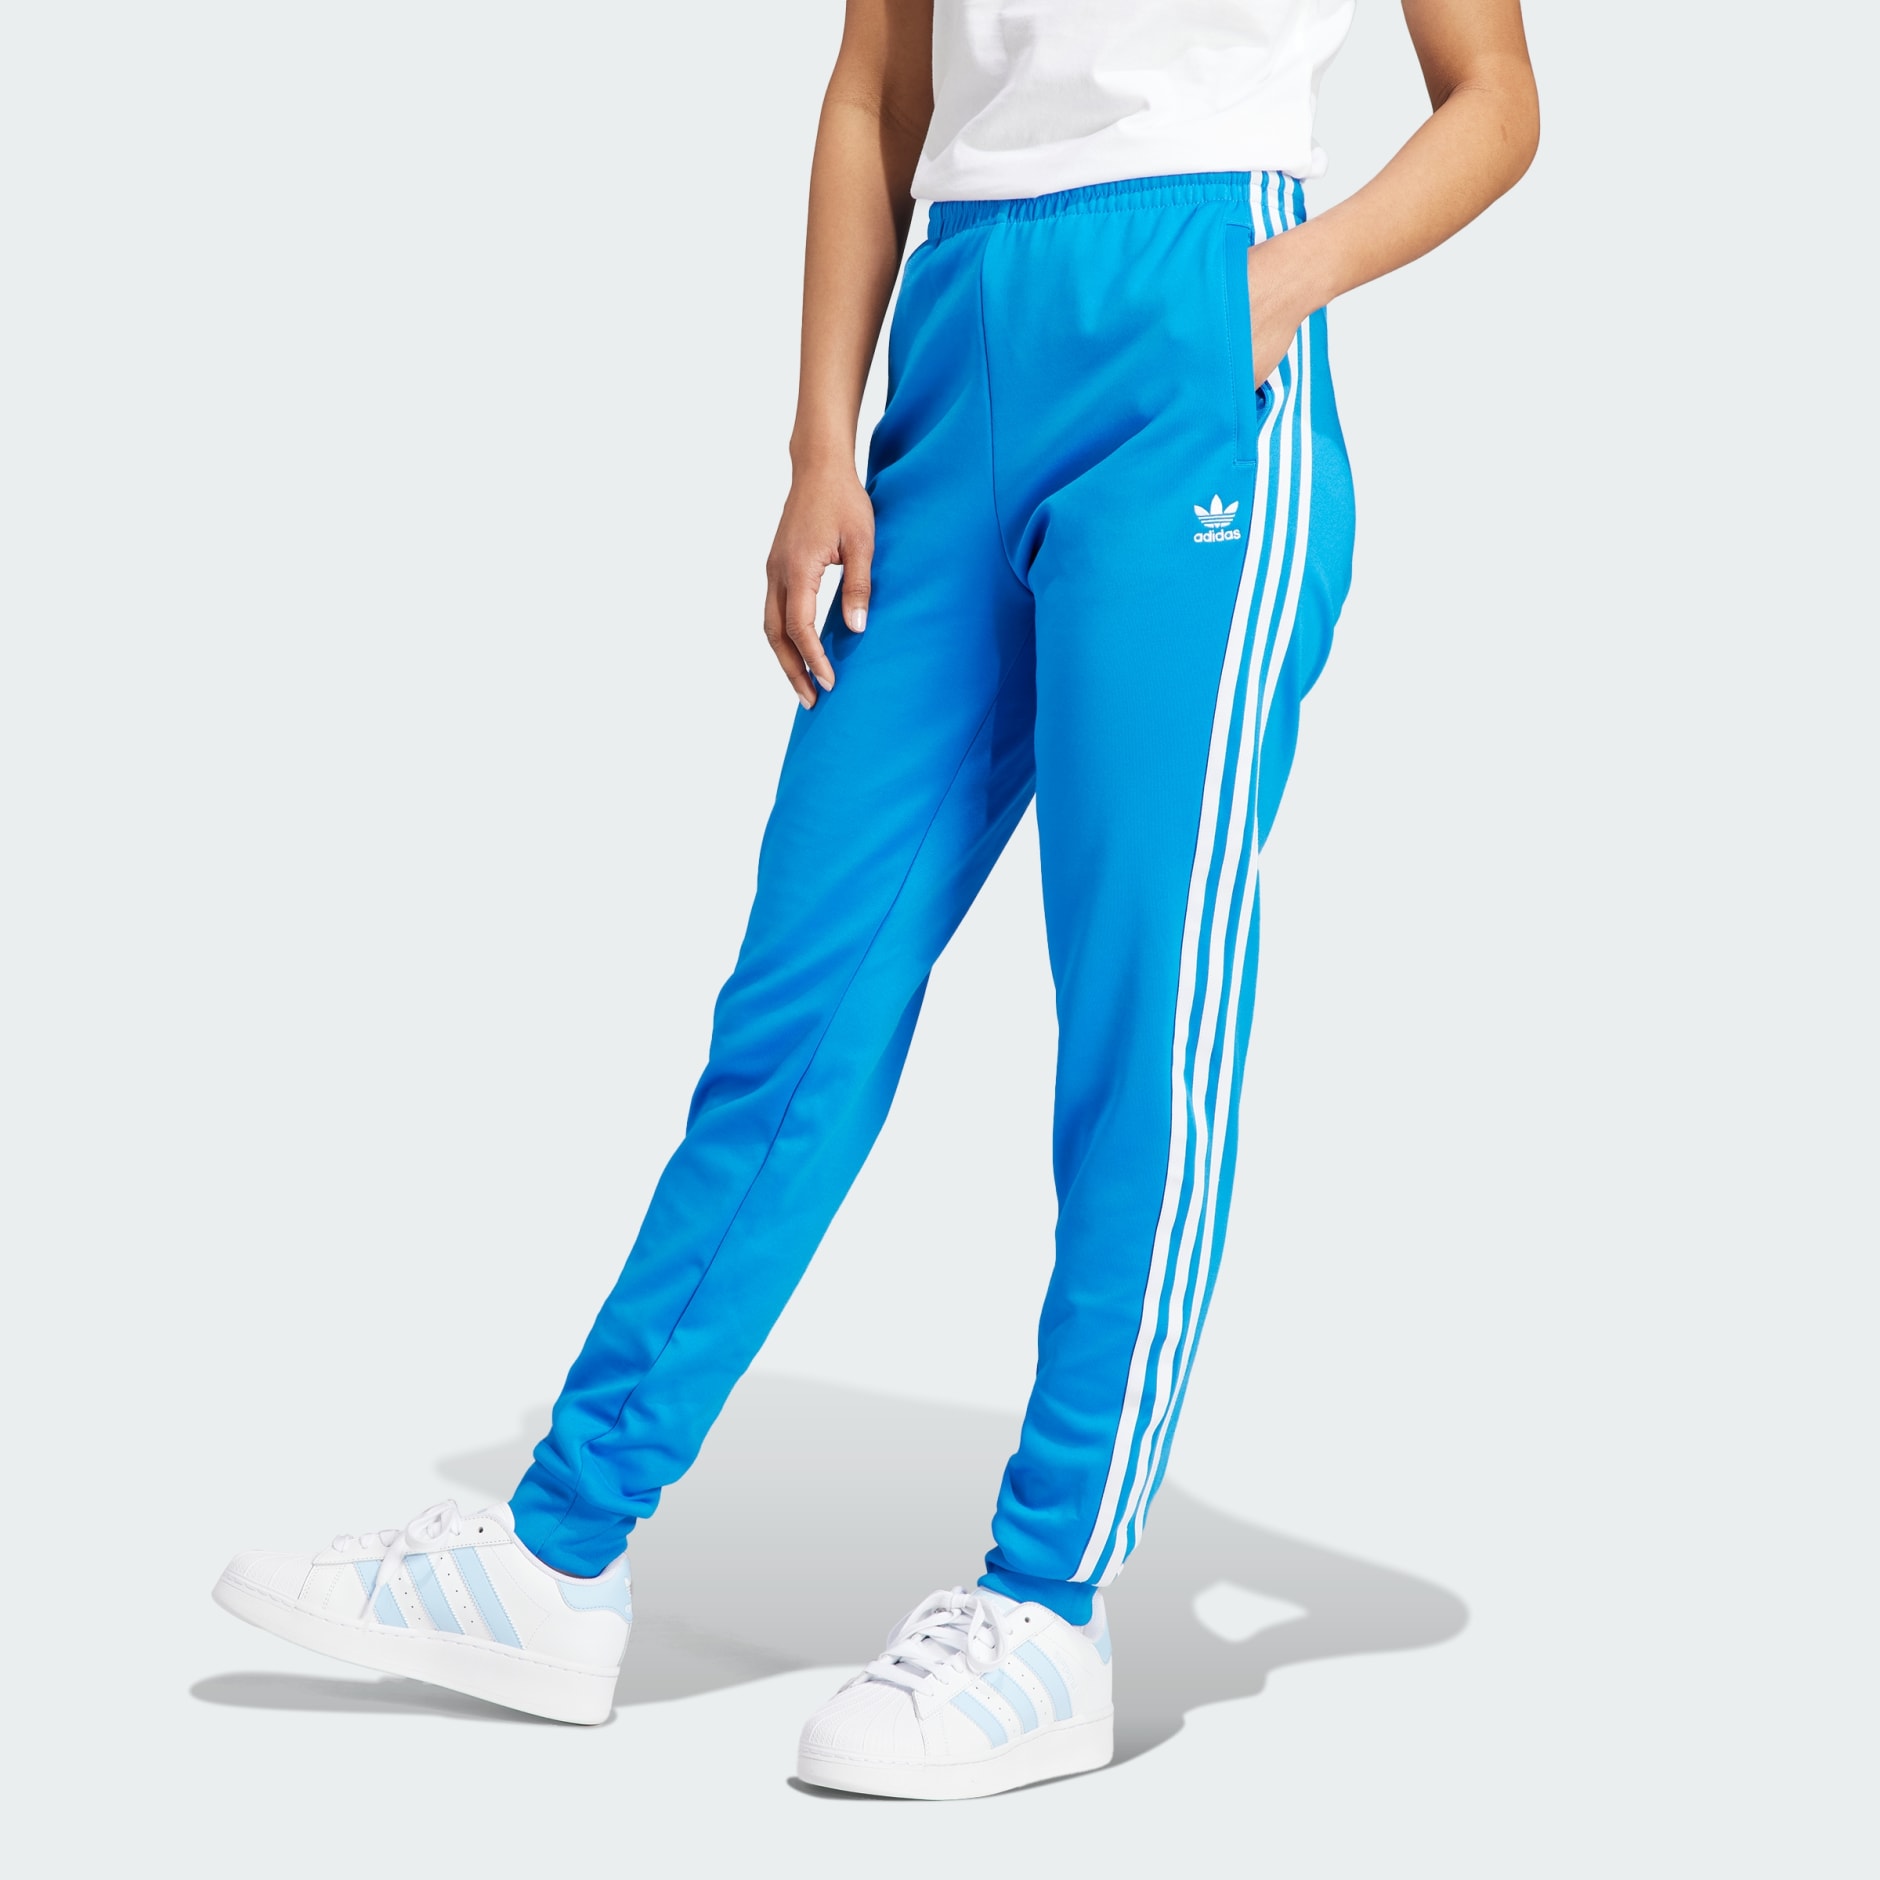 JOCKEY Palace Blue Track Pant (5-6 Yrs, 7-8 Yrs, 9-10 Yrs, 11-12 Yrs) in  Hyderabad at best price by Lucky Hosiery And Kids Wear Jockey Store -  Justdial